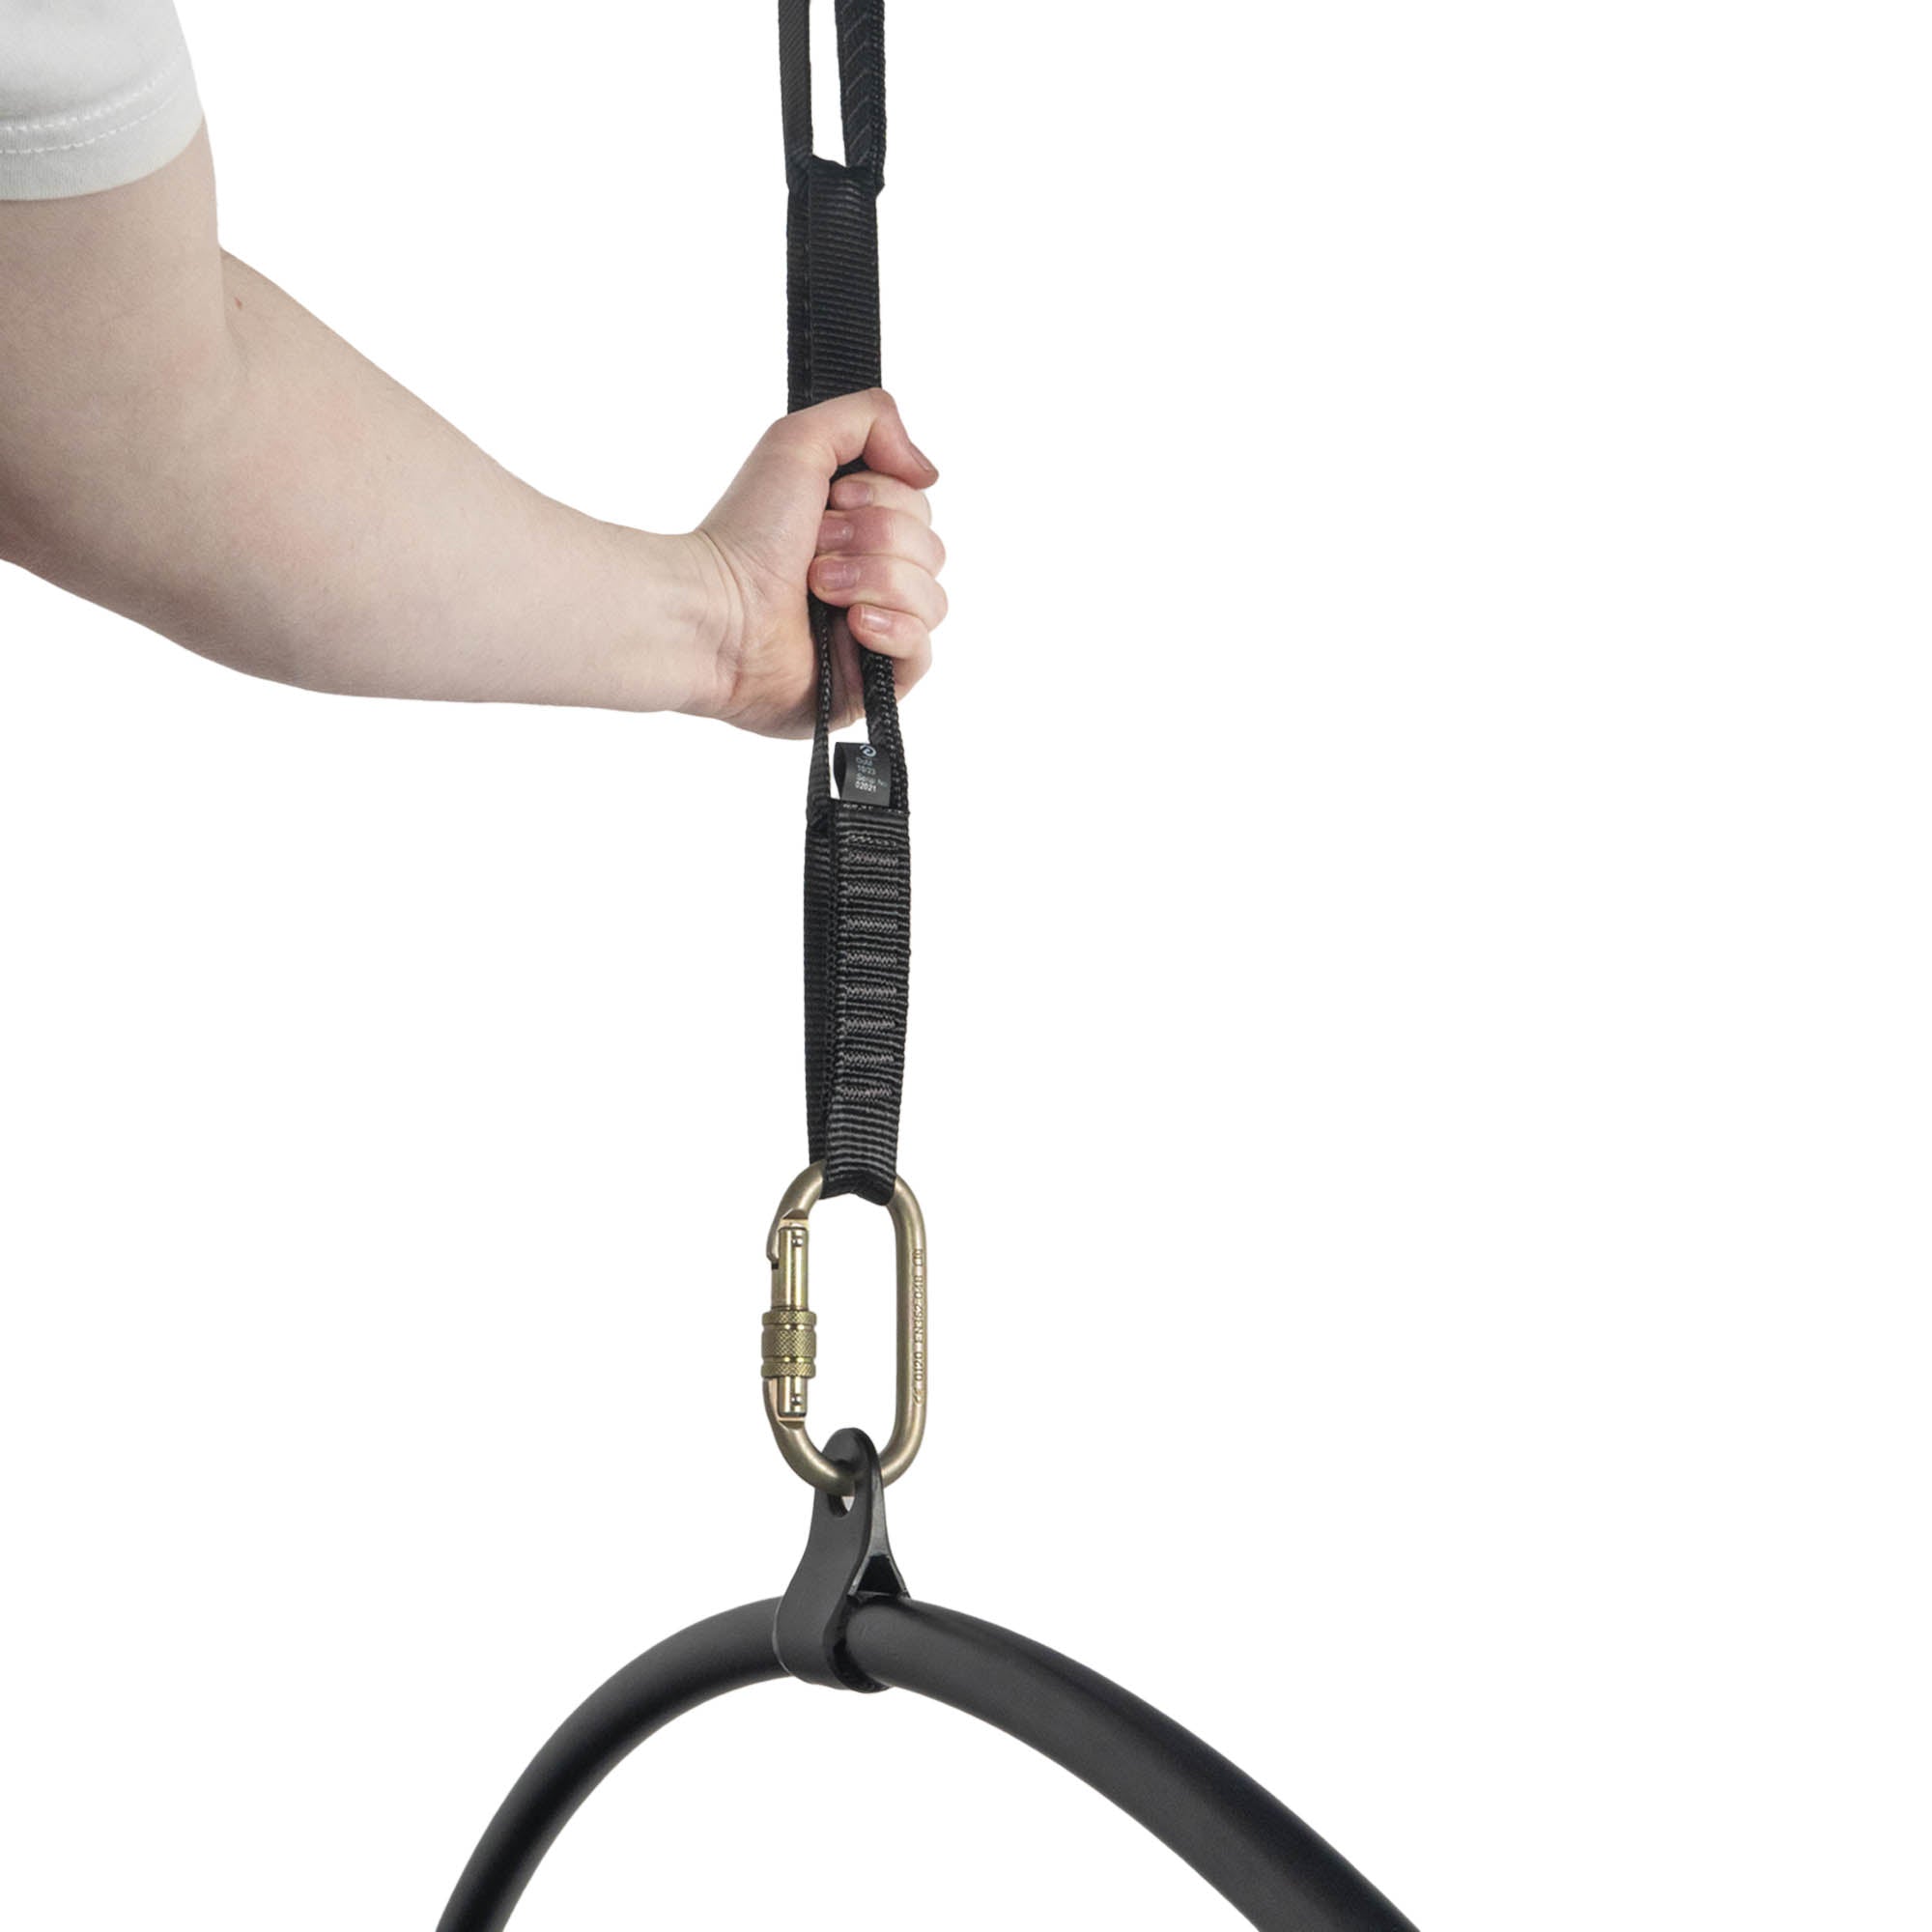 loop chain attached to a hoop and gripped